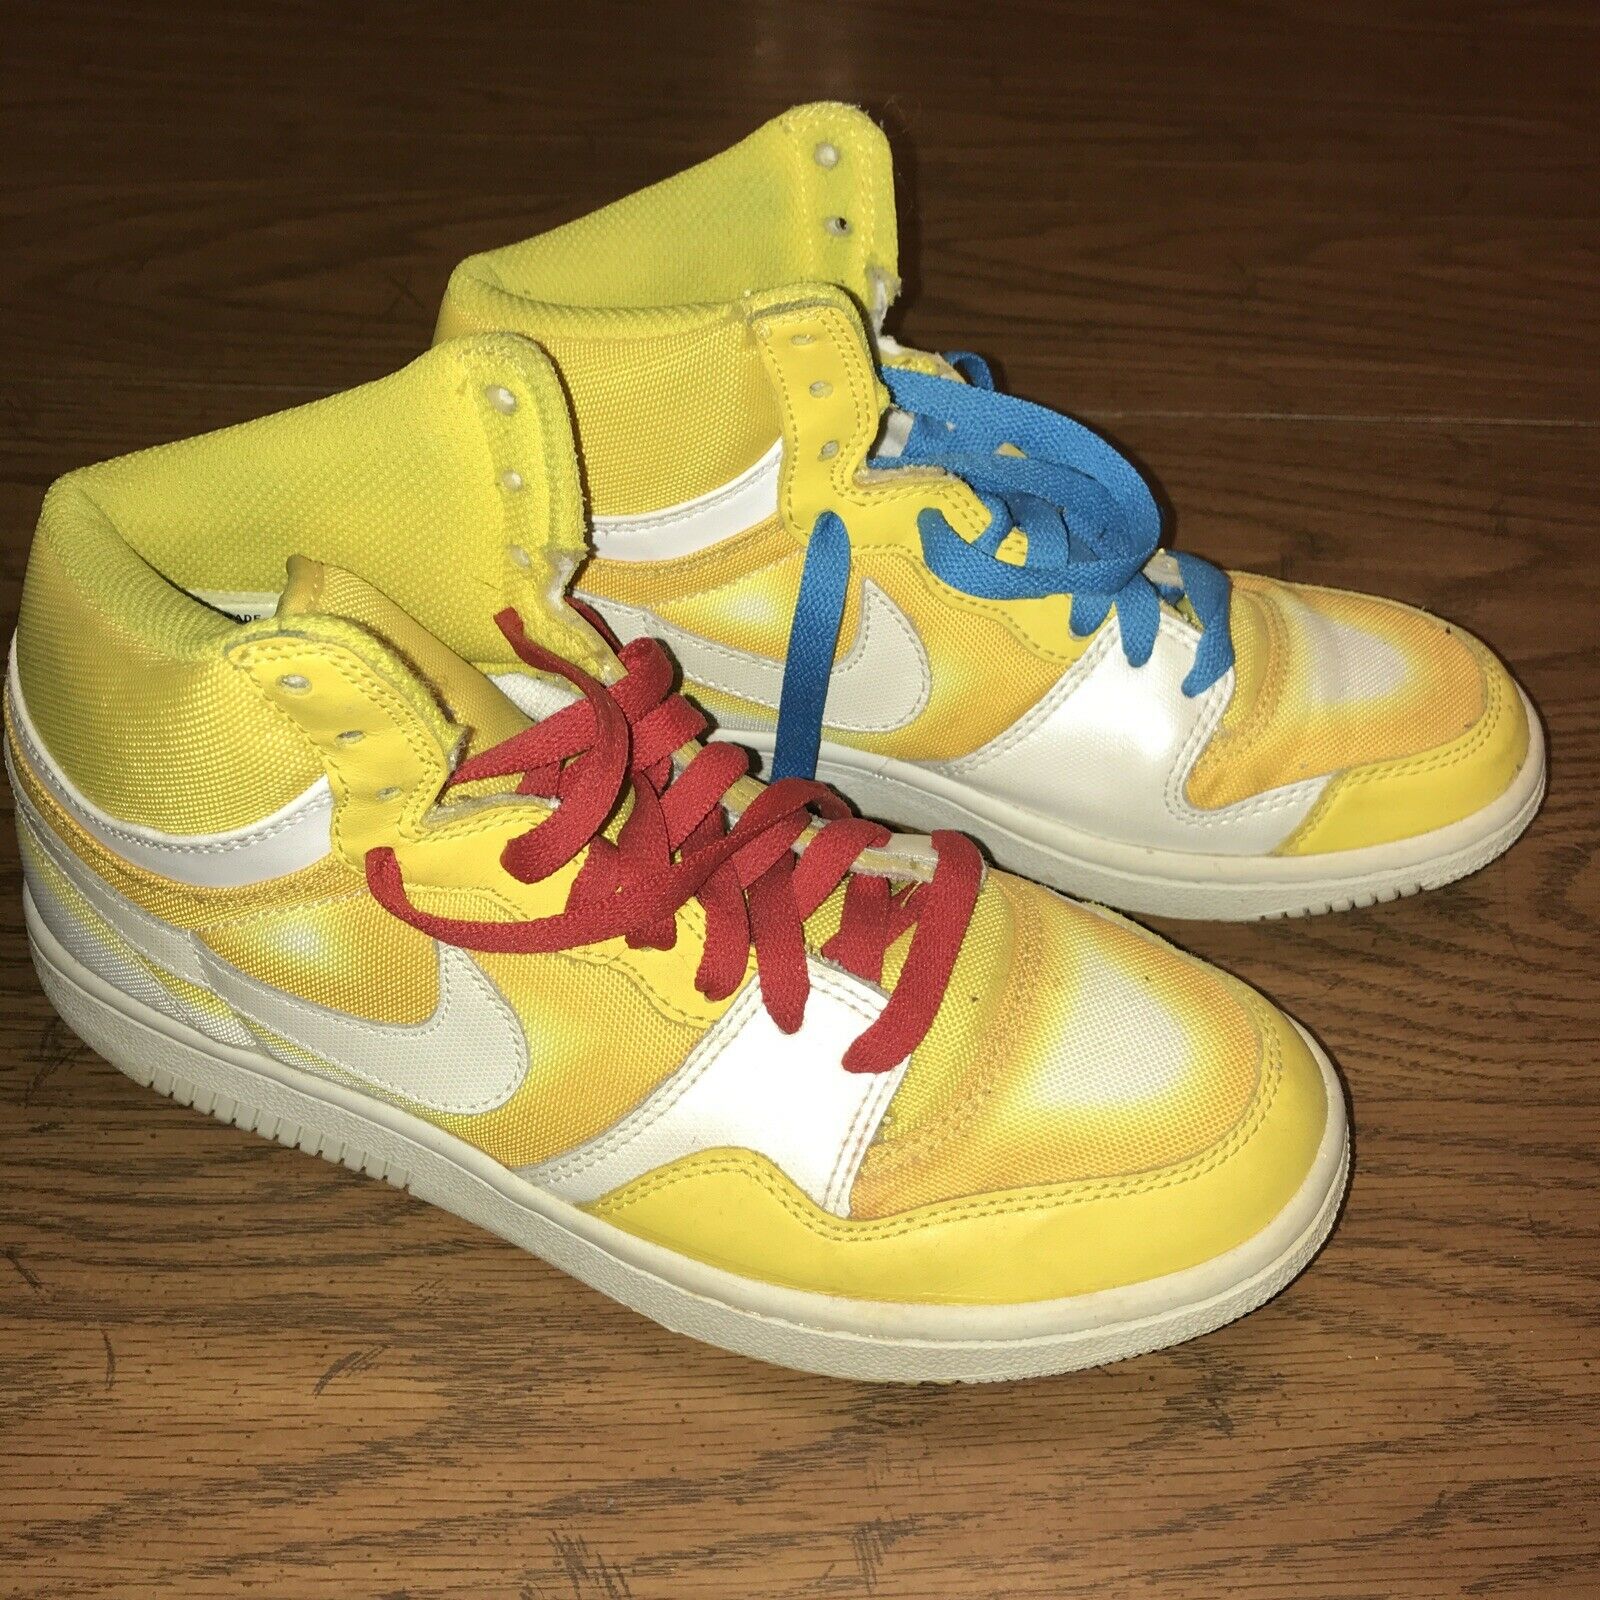 Nike Court Force Sneaker Shoes Yellow White High Top Lace Up Women’s Sz 9